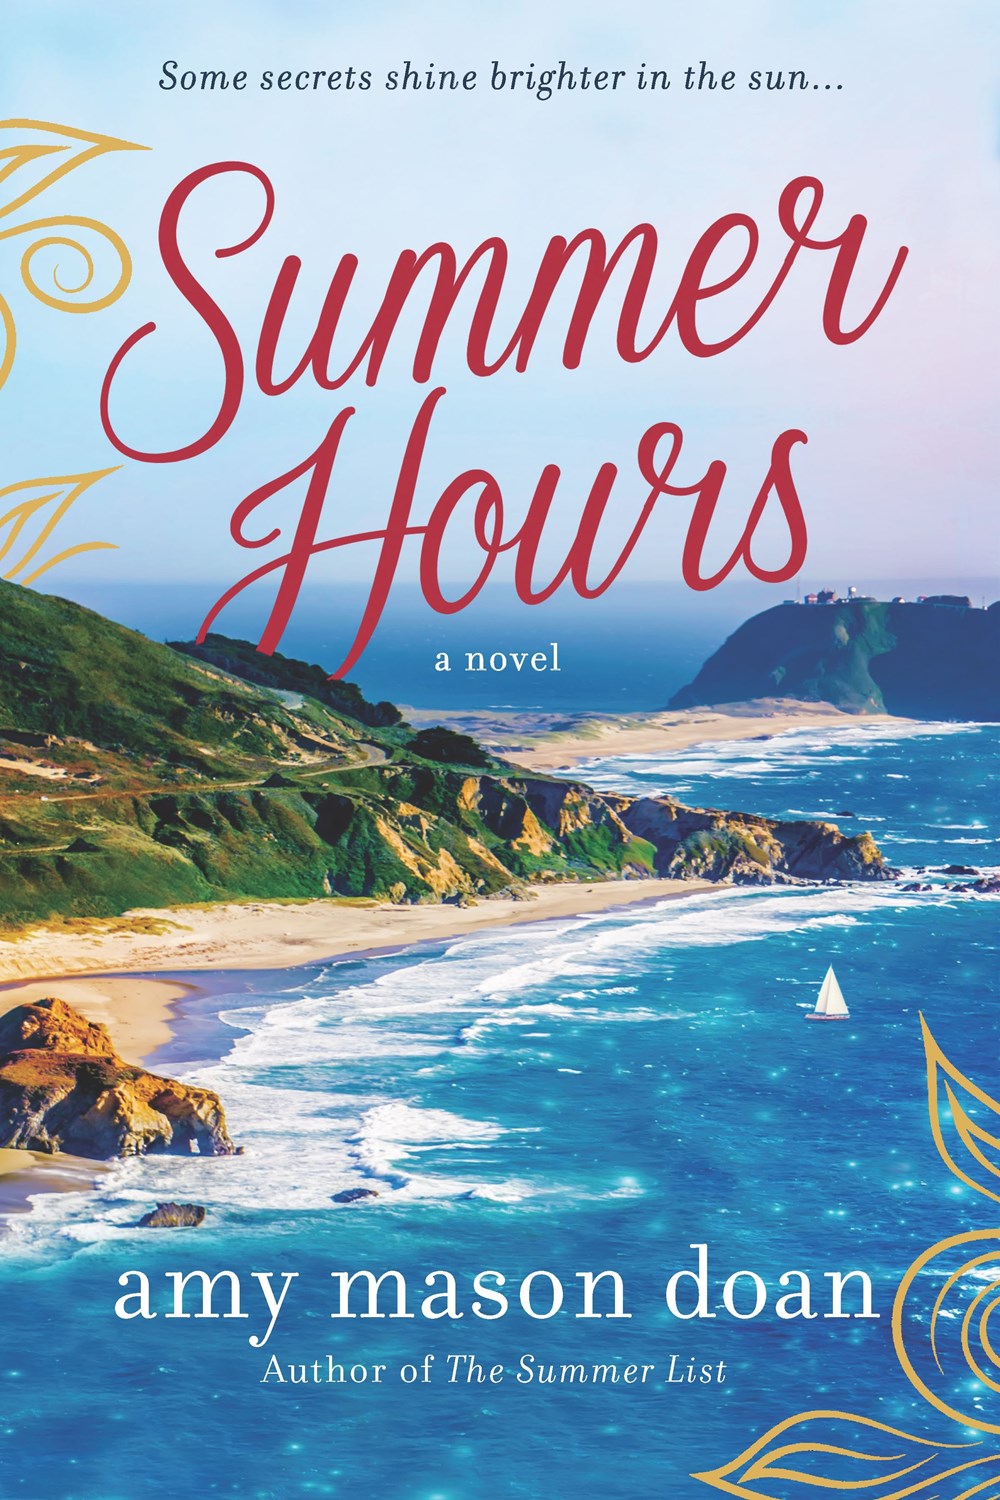 Book clubs, coast with Amy Mason Doan’s SUMMER HOURS Harlequin for